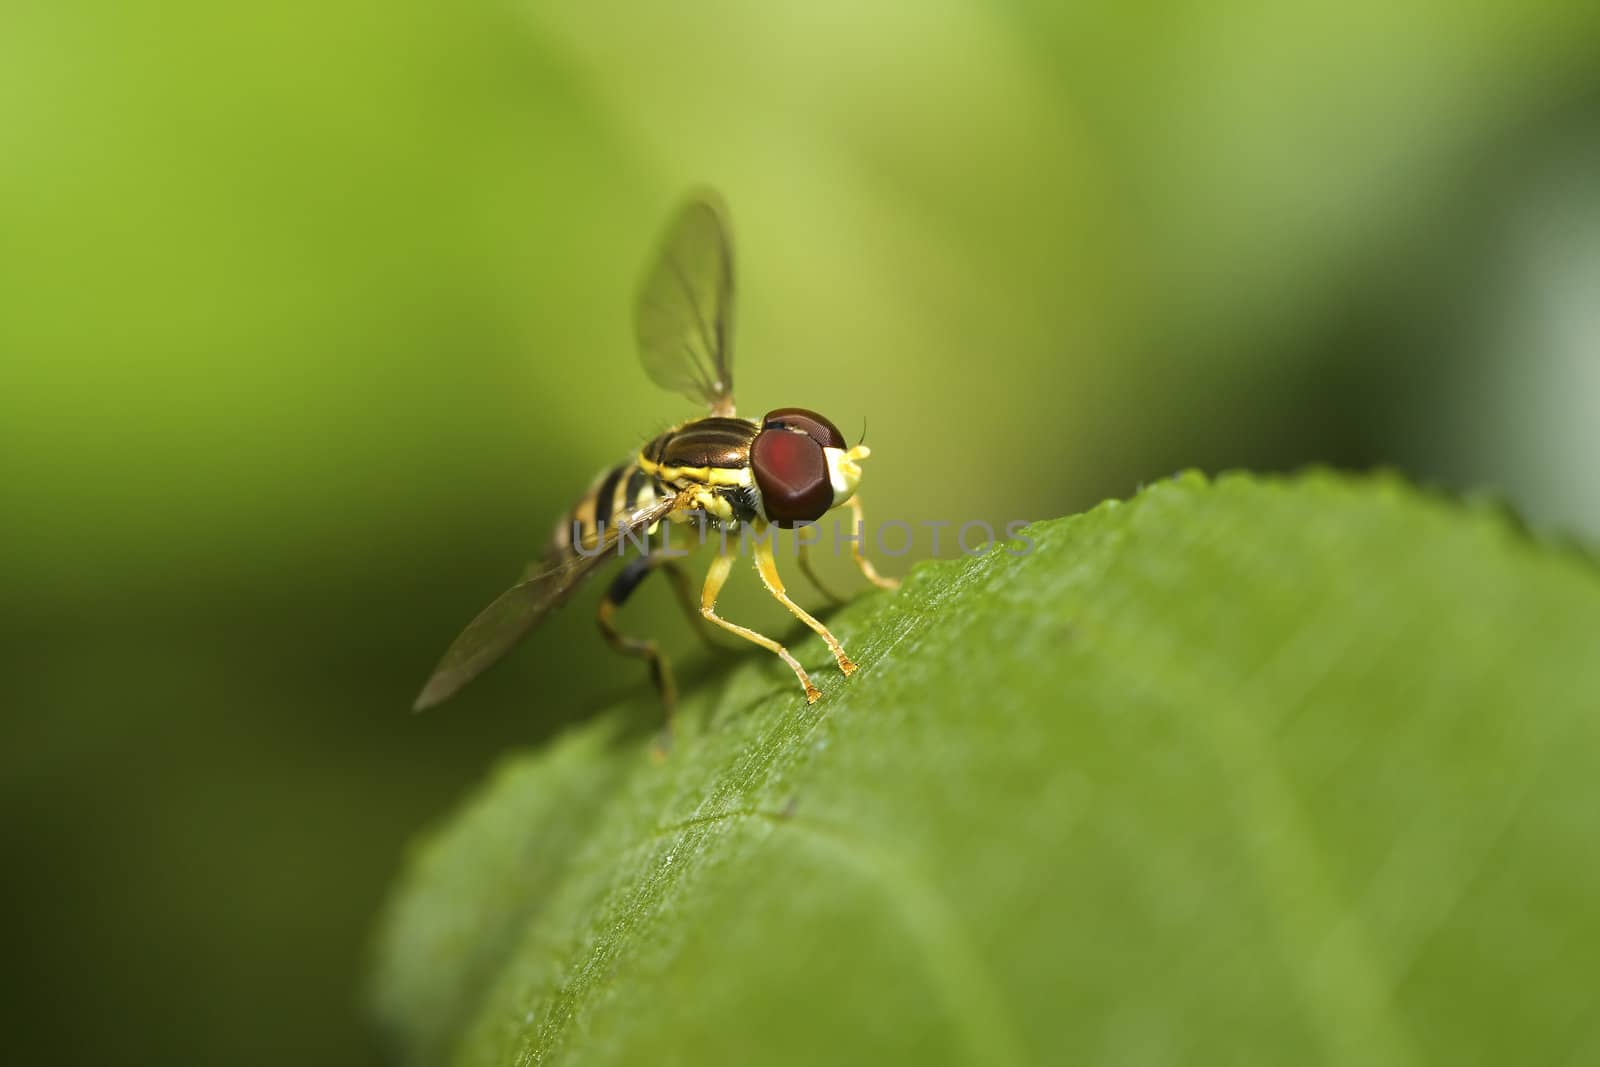 Hover fly by Coffee999